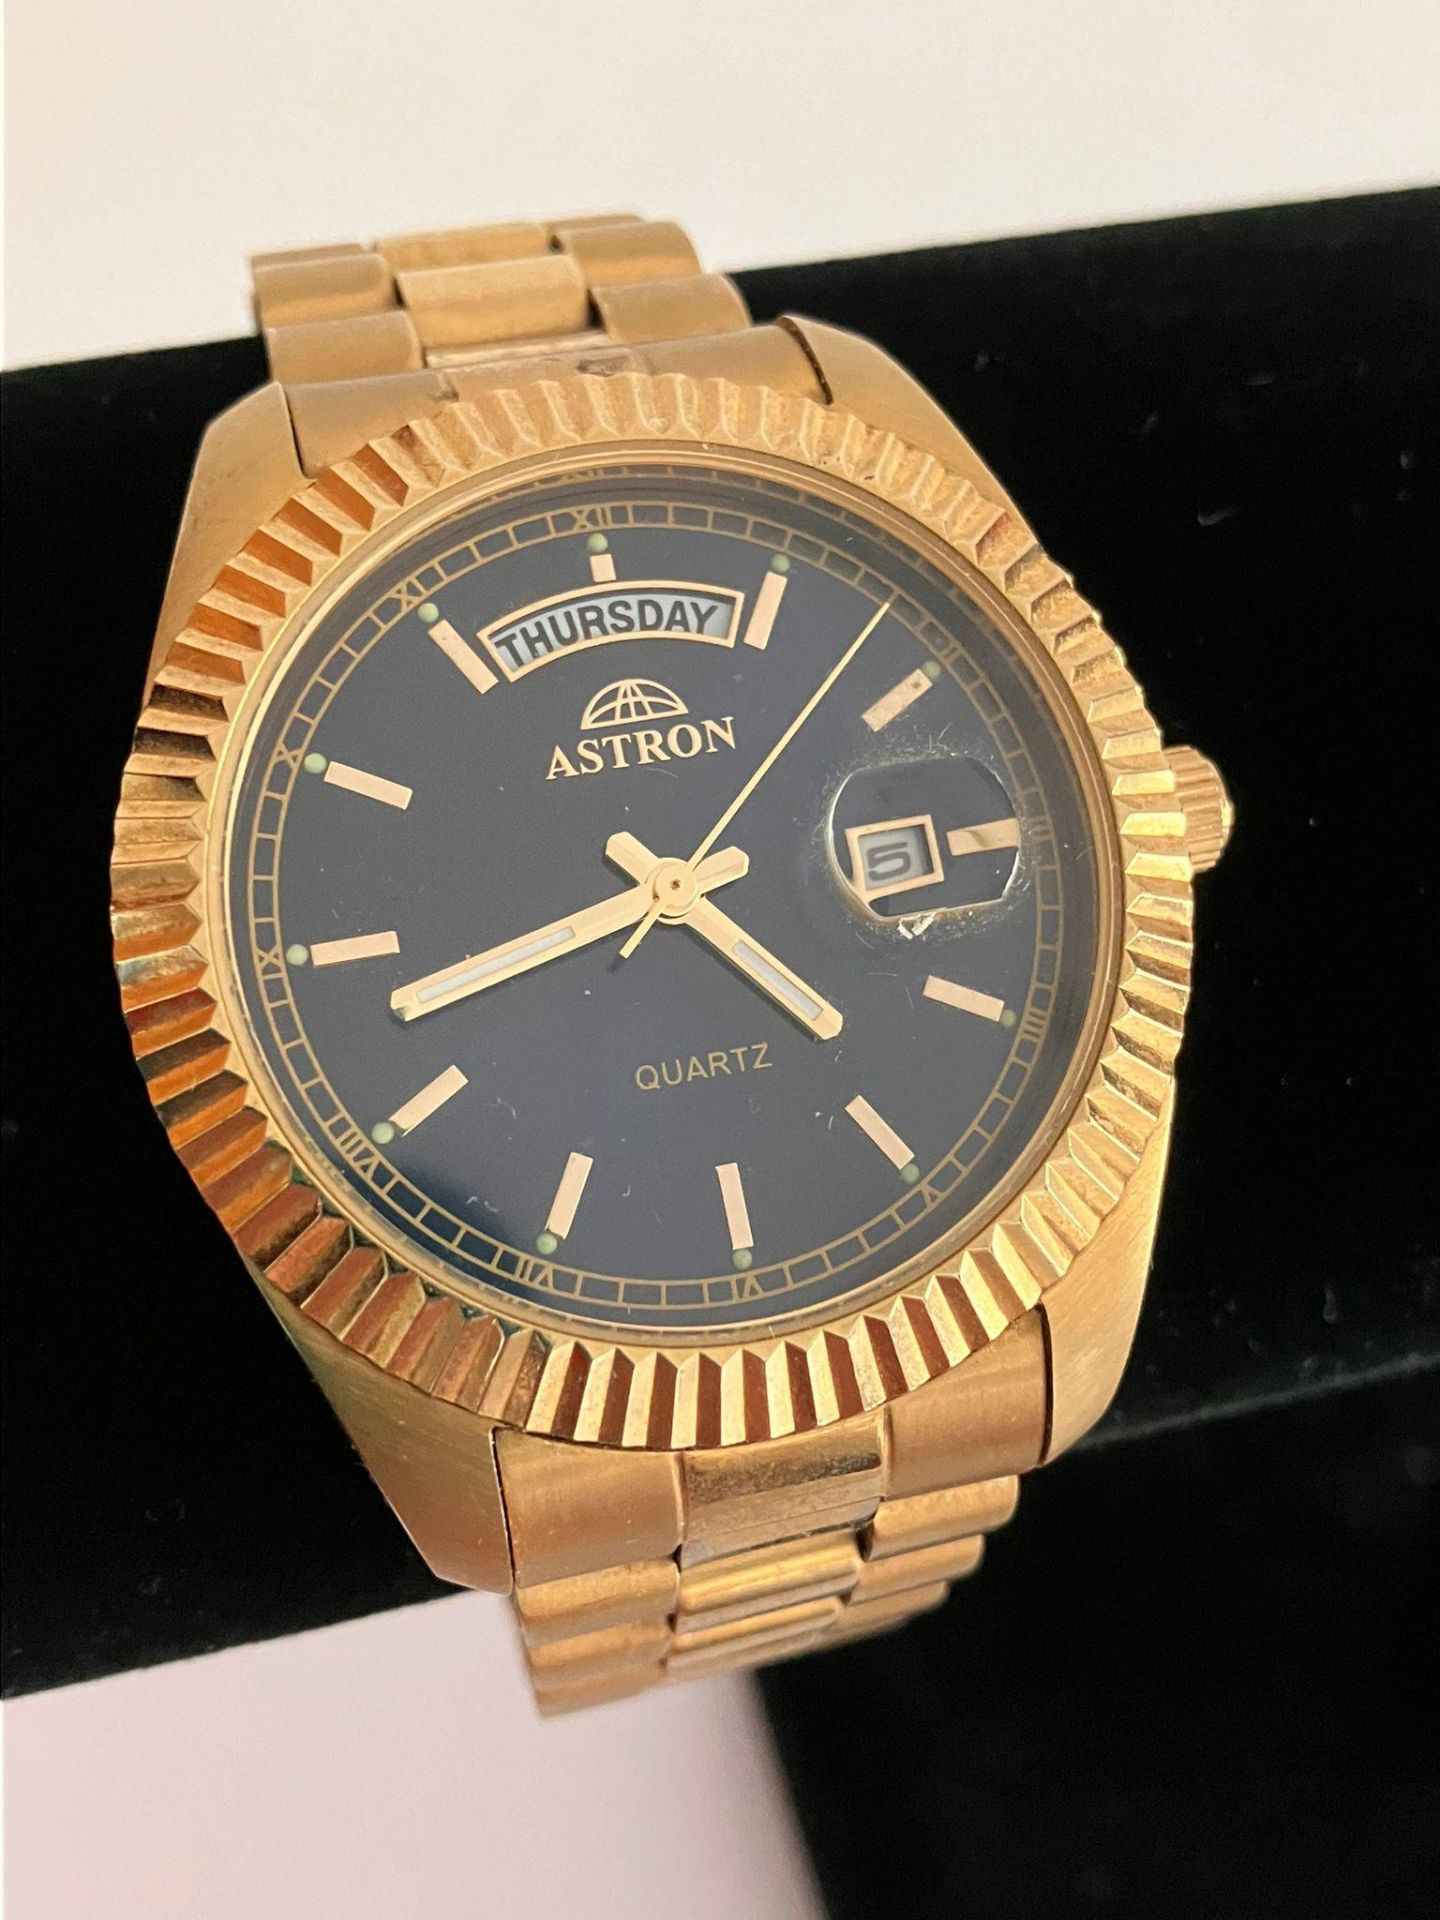 Gentlemans ASTRON QUARTZ GOLD PLATED WRISTWATCH. Finished in Gold Tone with Bracelet strap. Day/Date